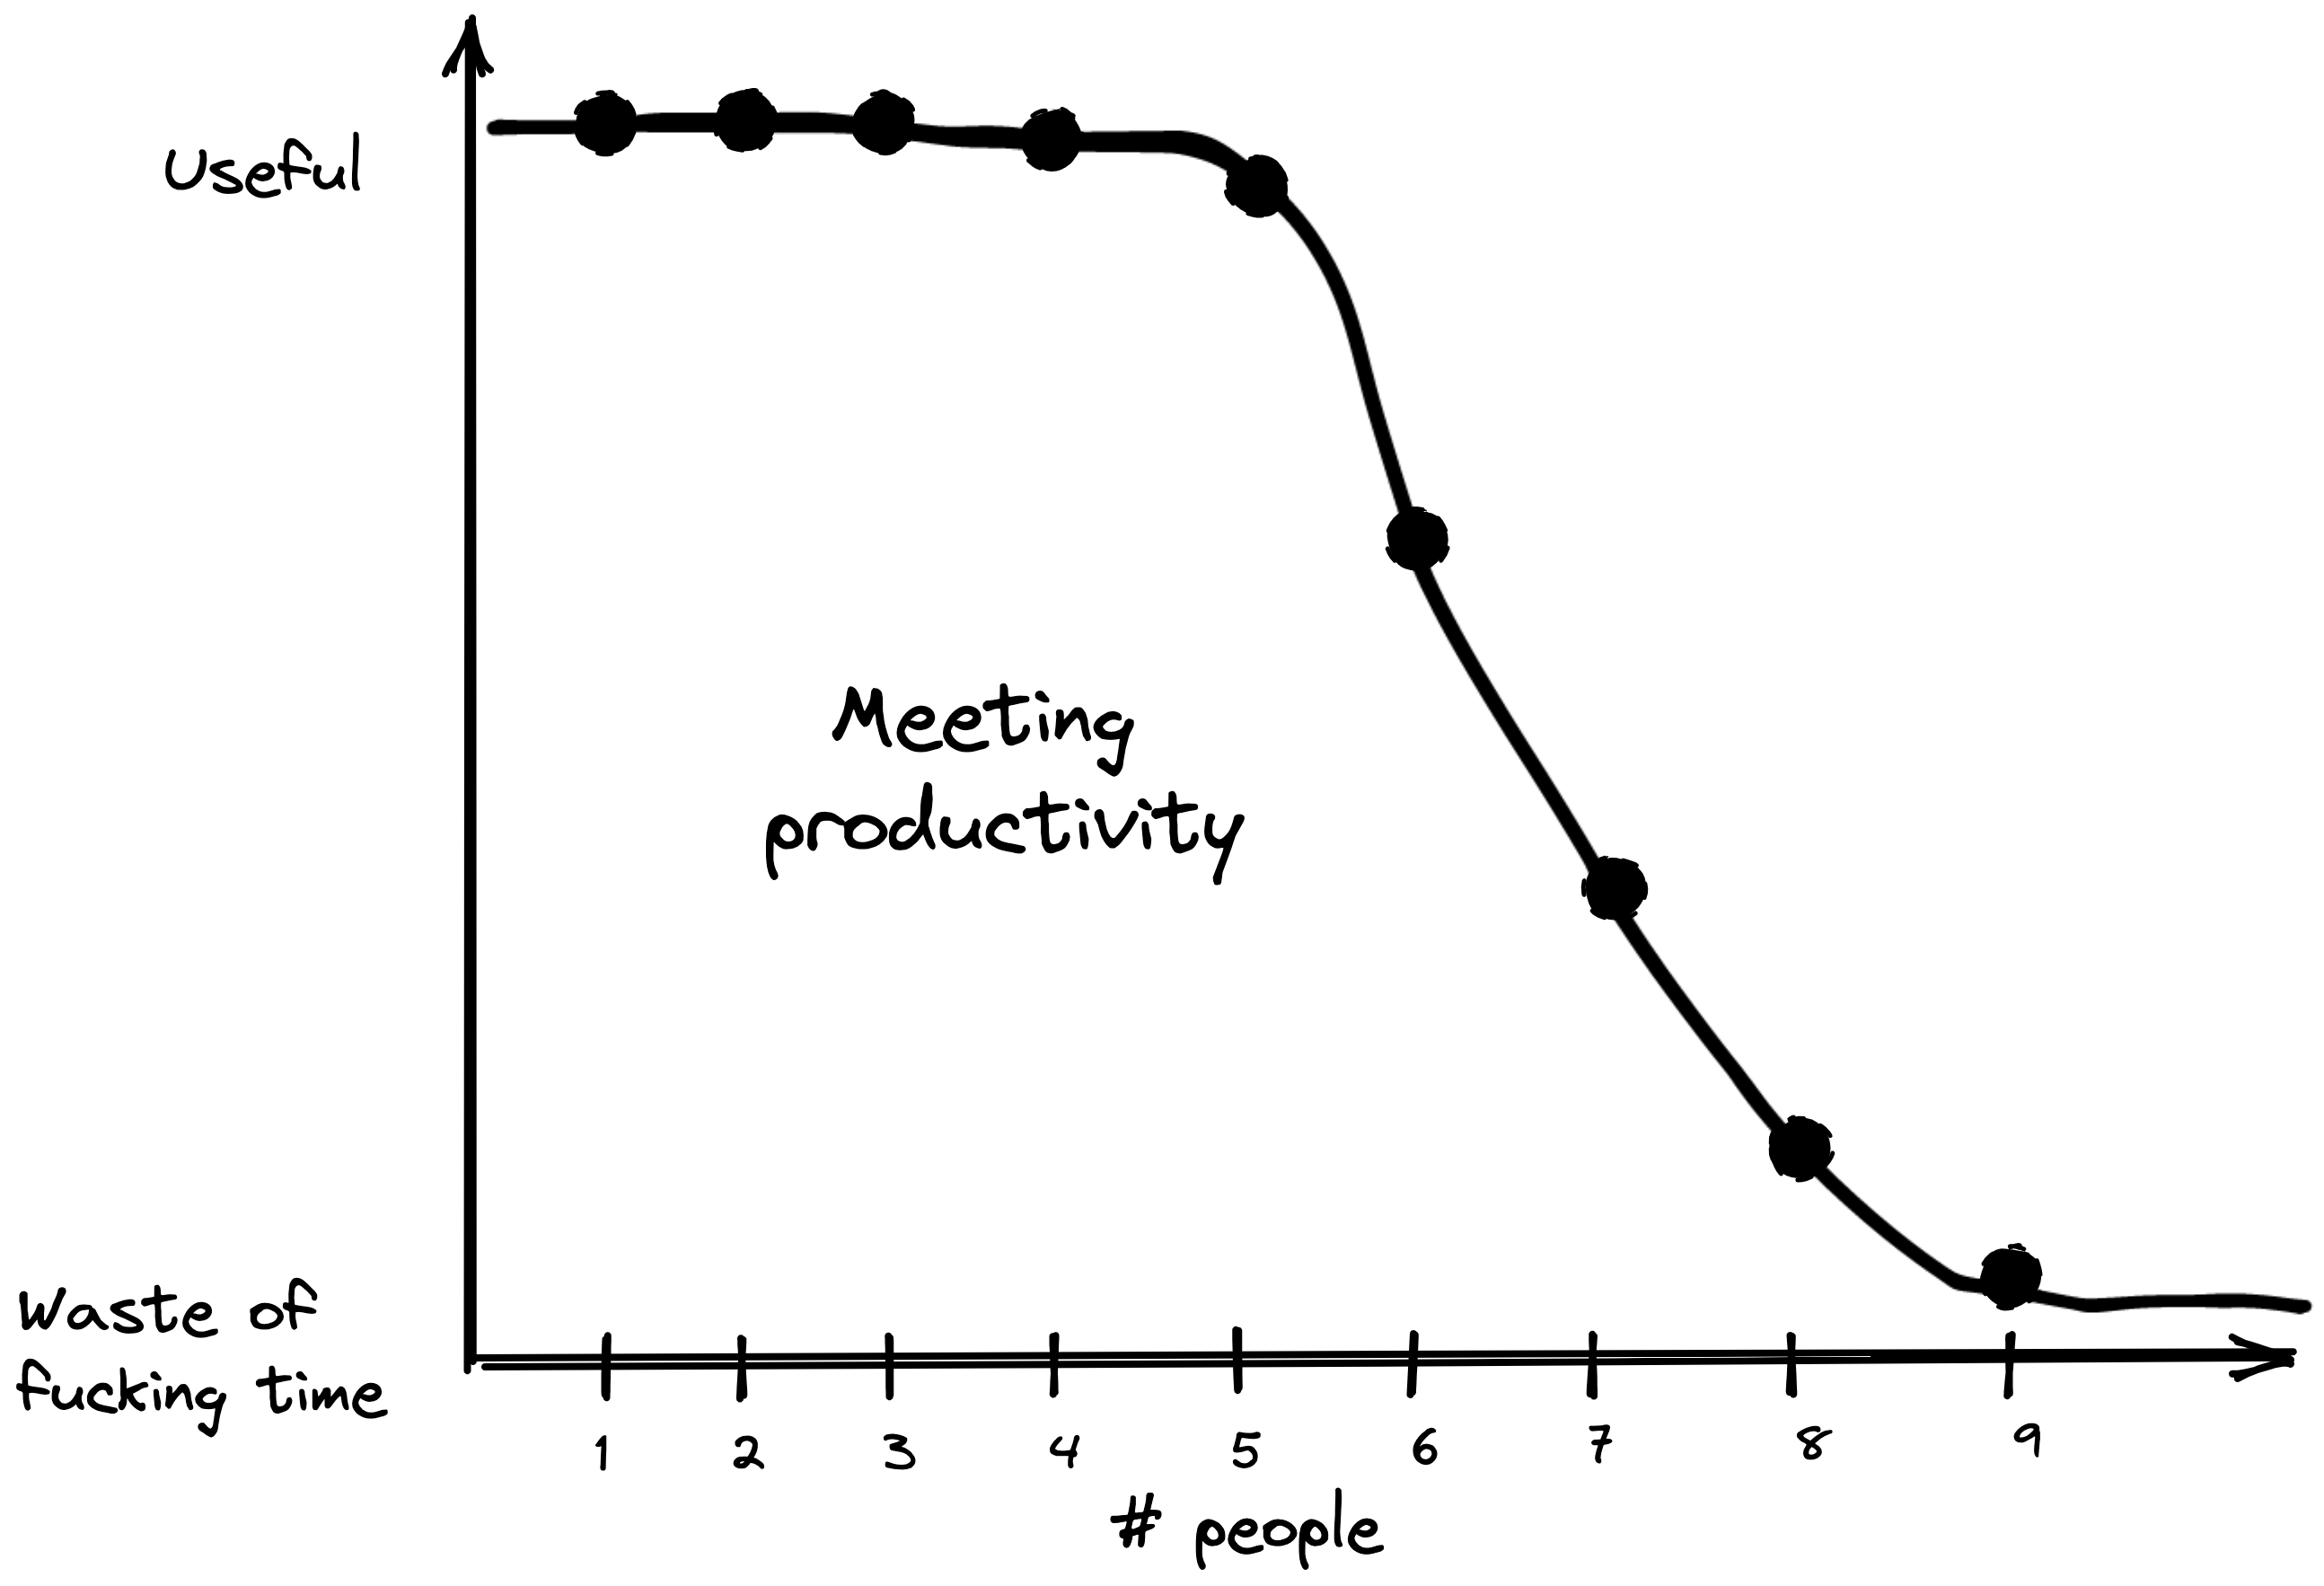 a chart that shows the optimanl number of people that should join a meeting